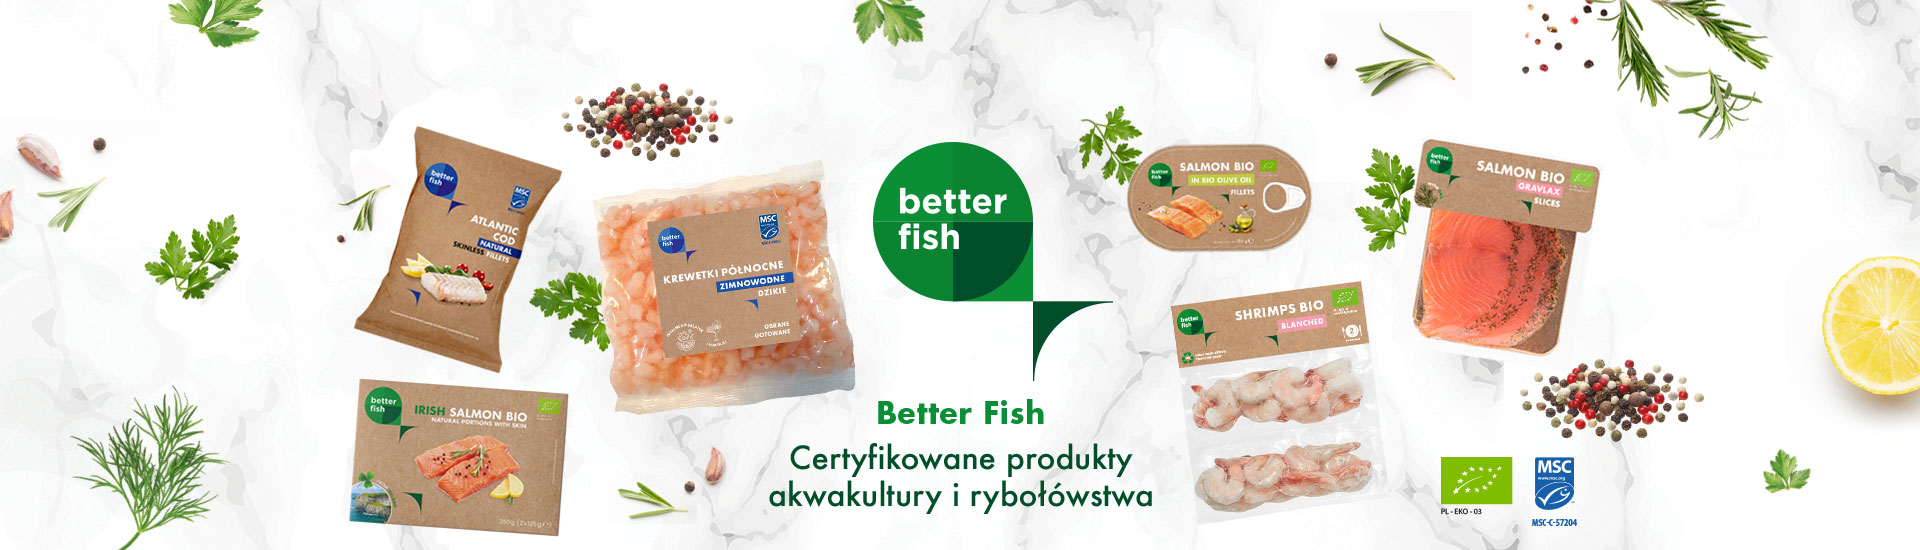 https://zielonemielone.pl/11400-ryby-i-owoce-morza?q=Marka-BETTER+FISH#products